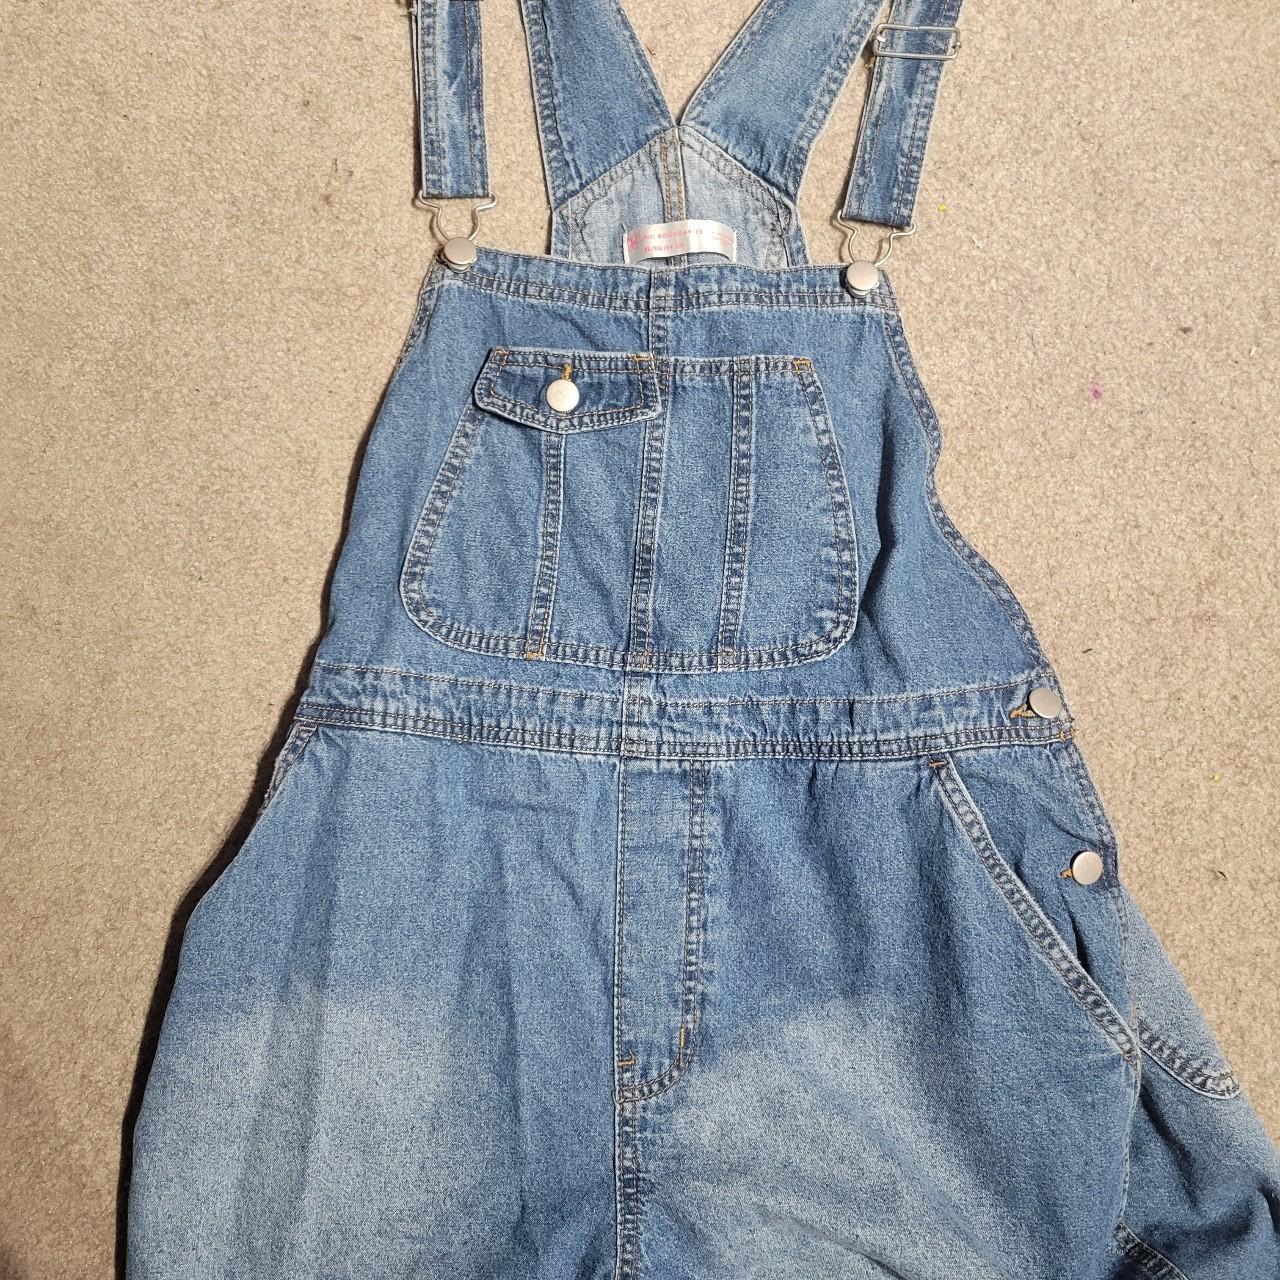 Jean Overall Shorts - Depop